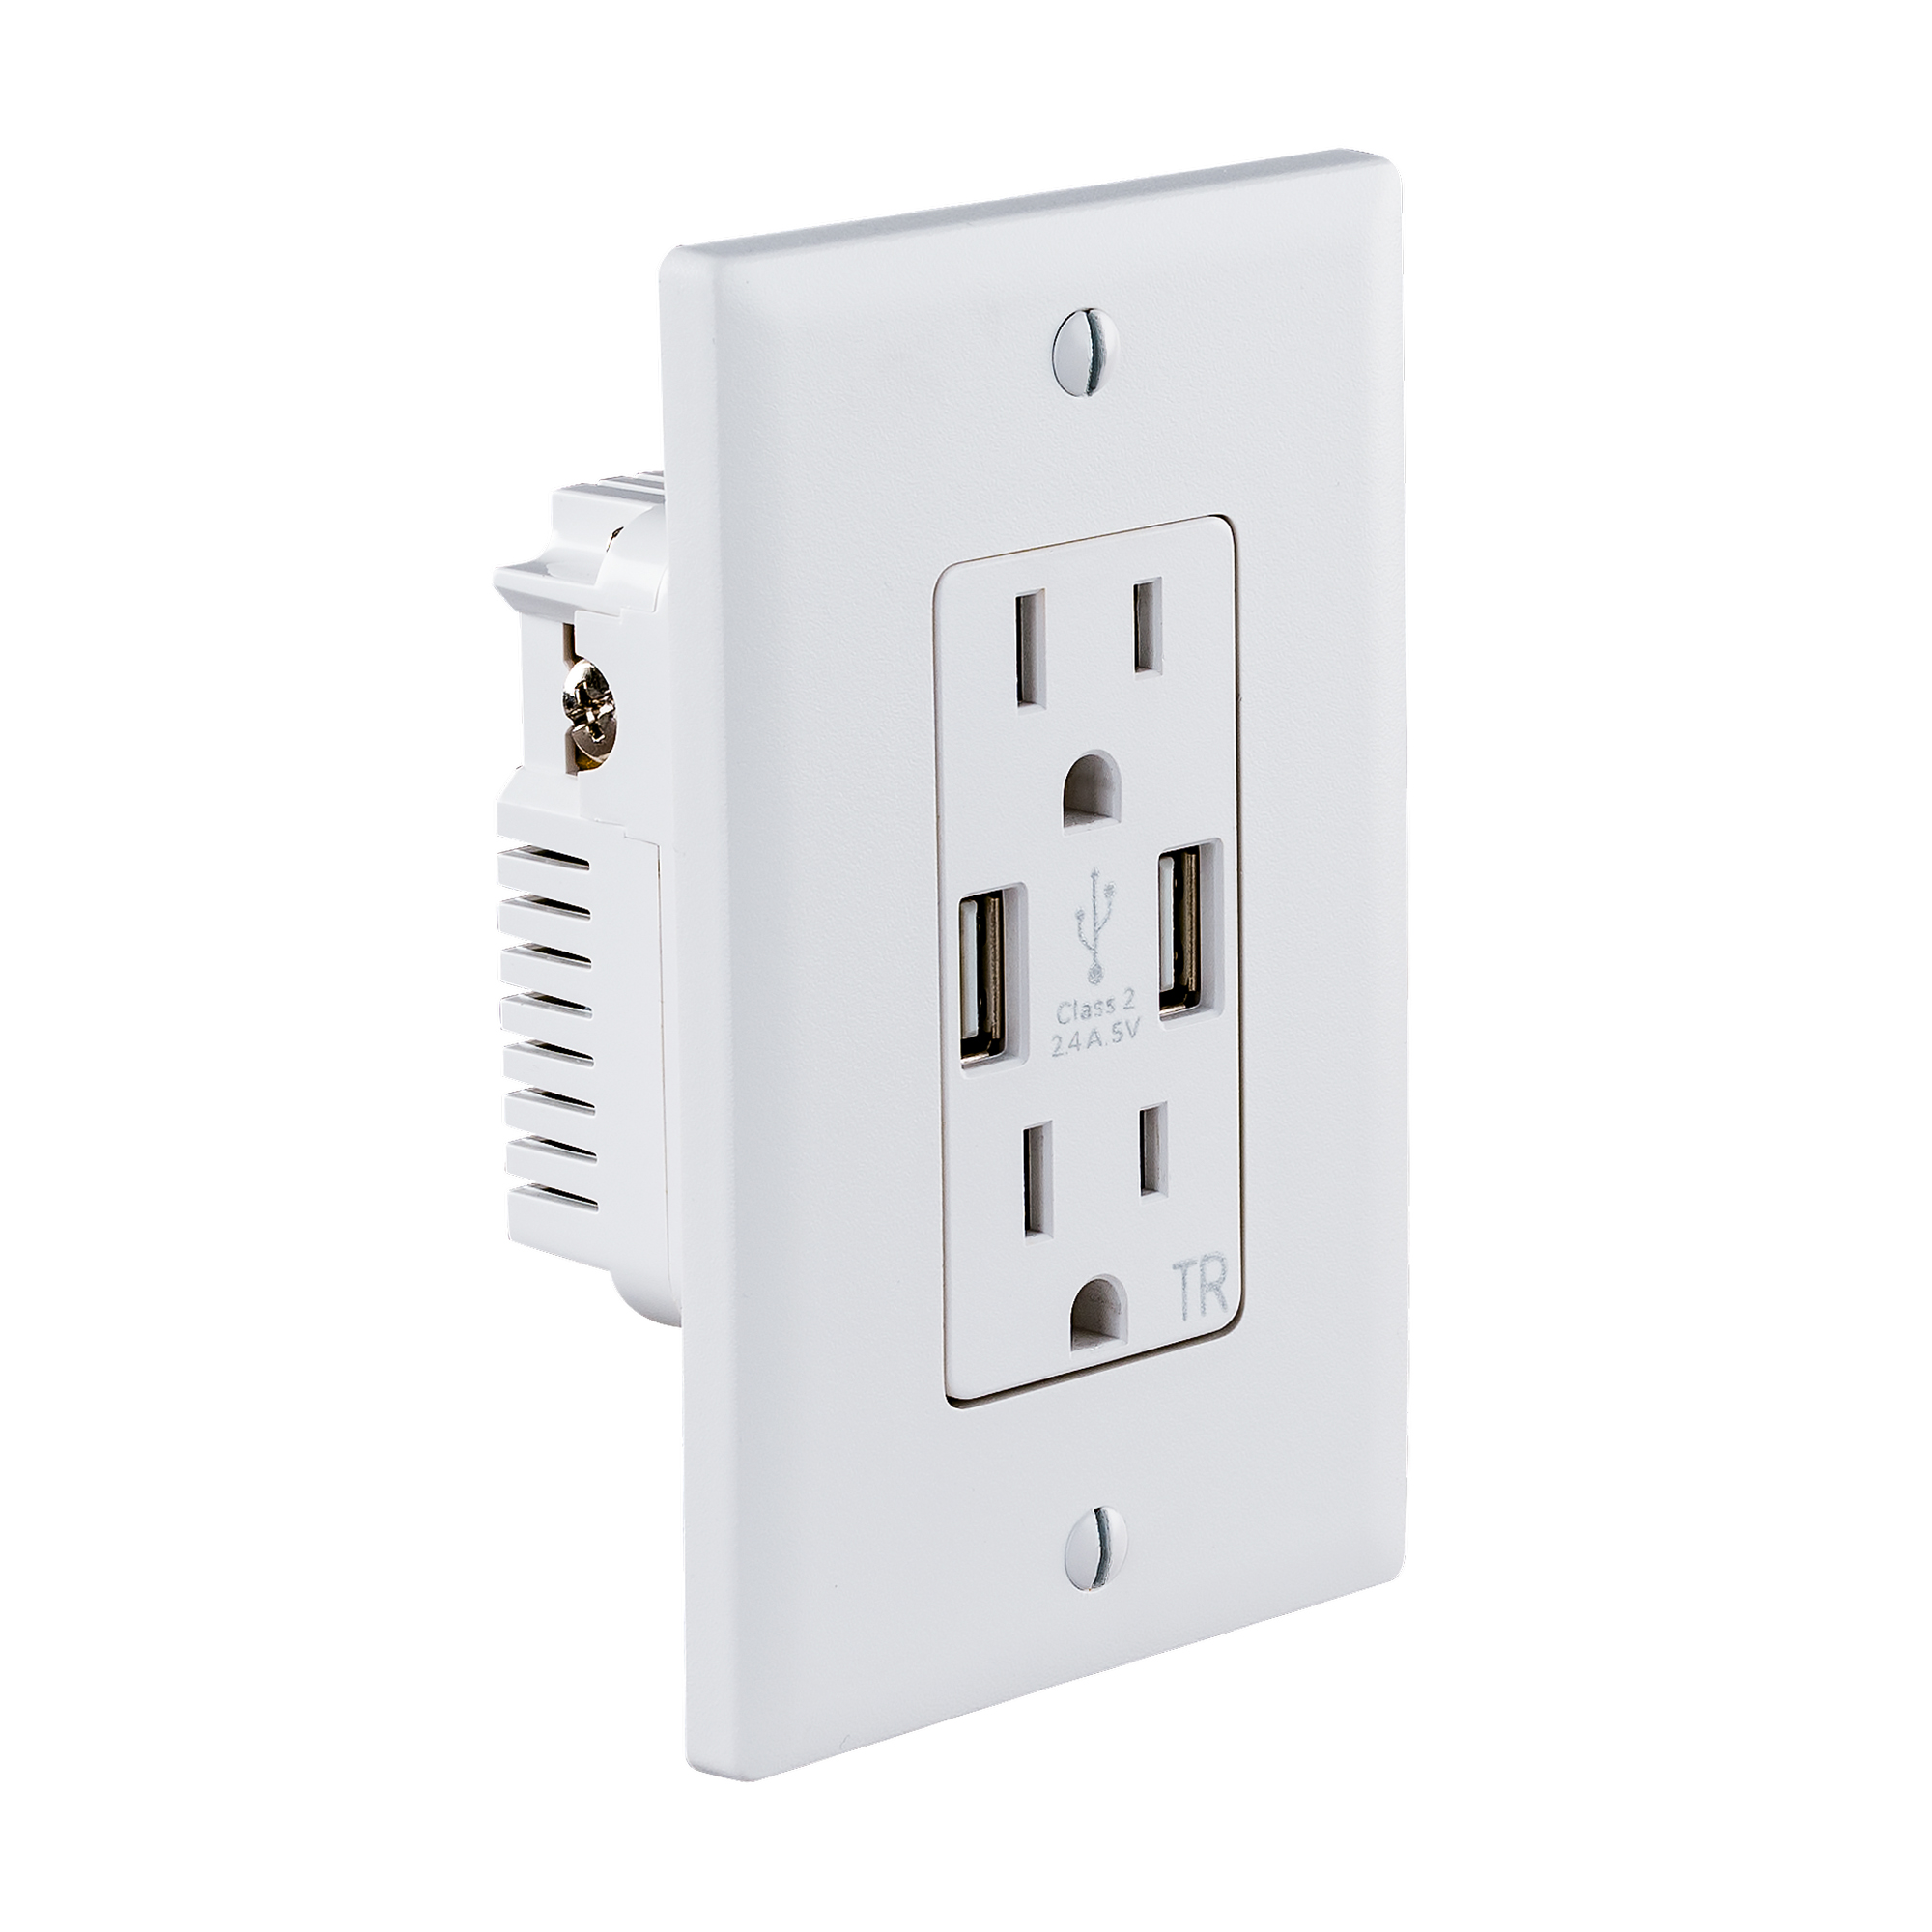 LOT10 Dual USB Port Wall Socket Charger AC Power Receptacle Outlet Plate Panel 